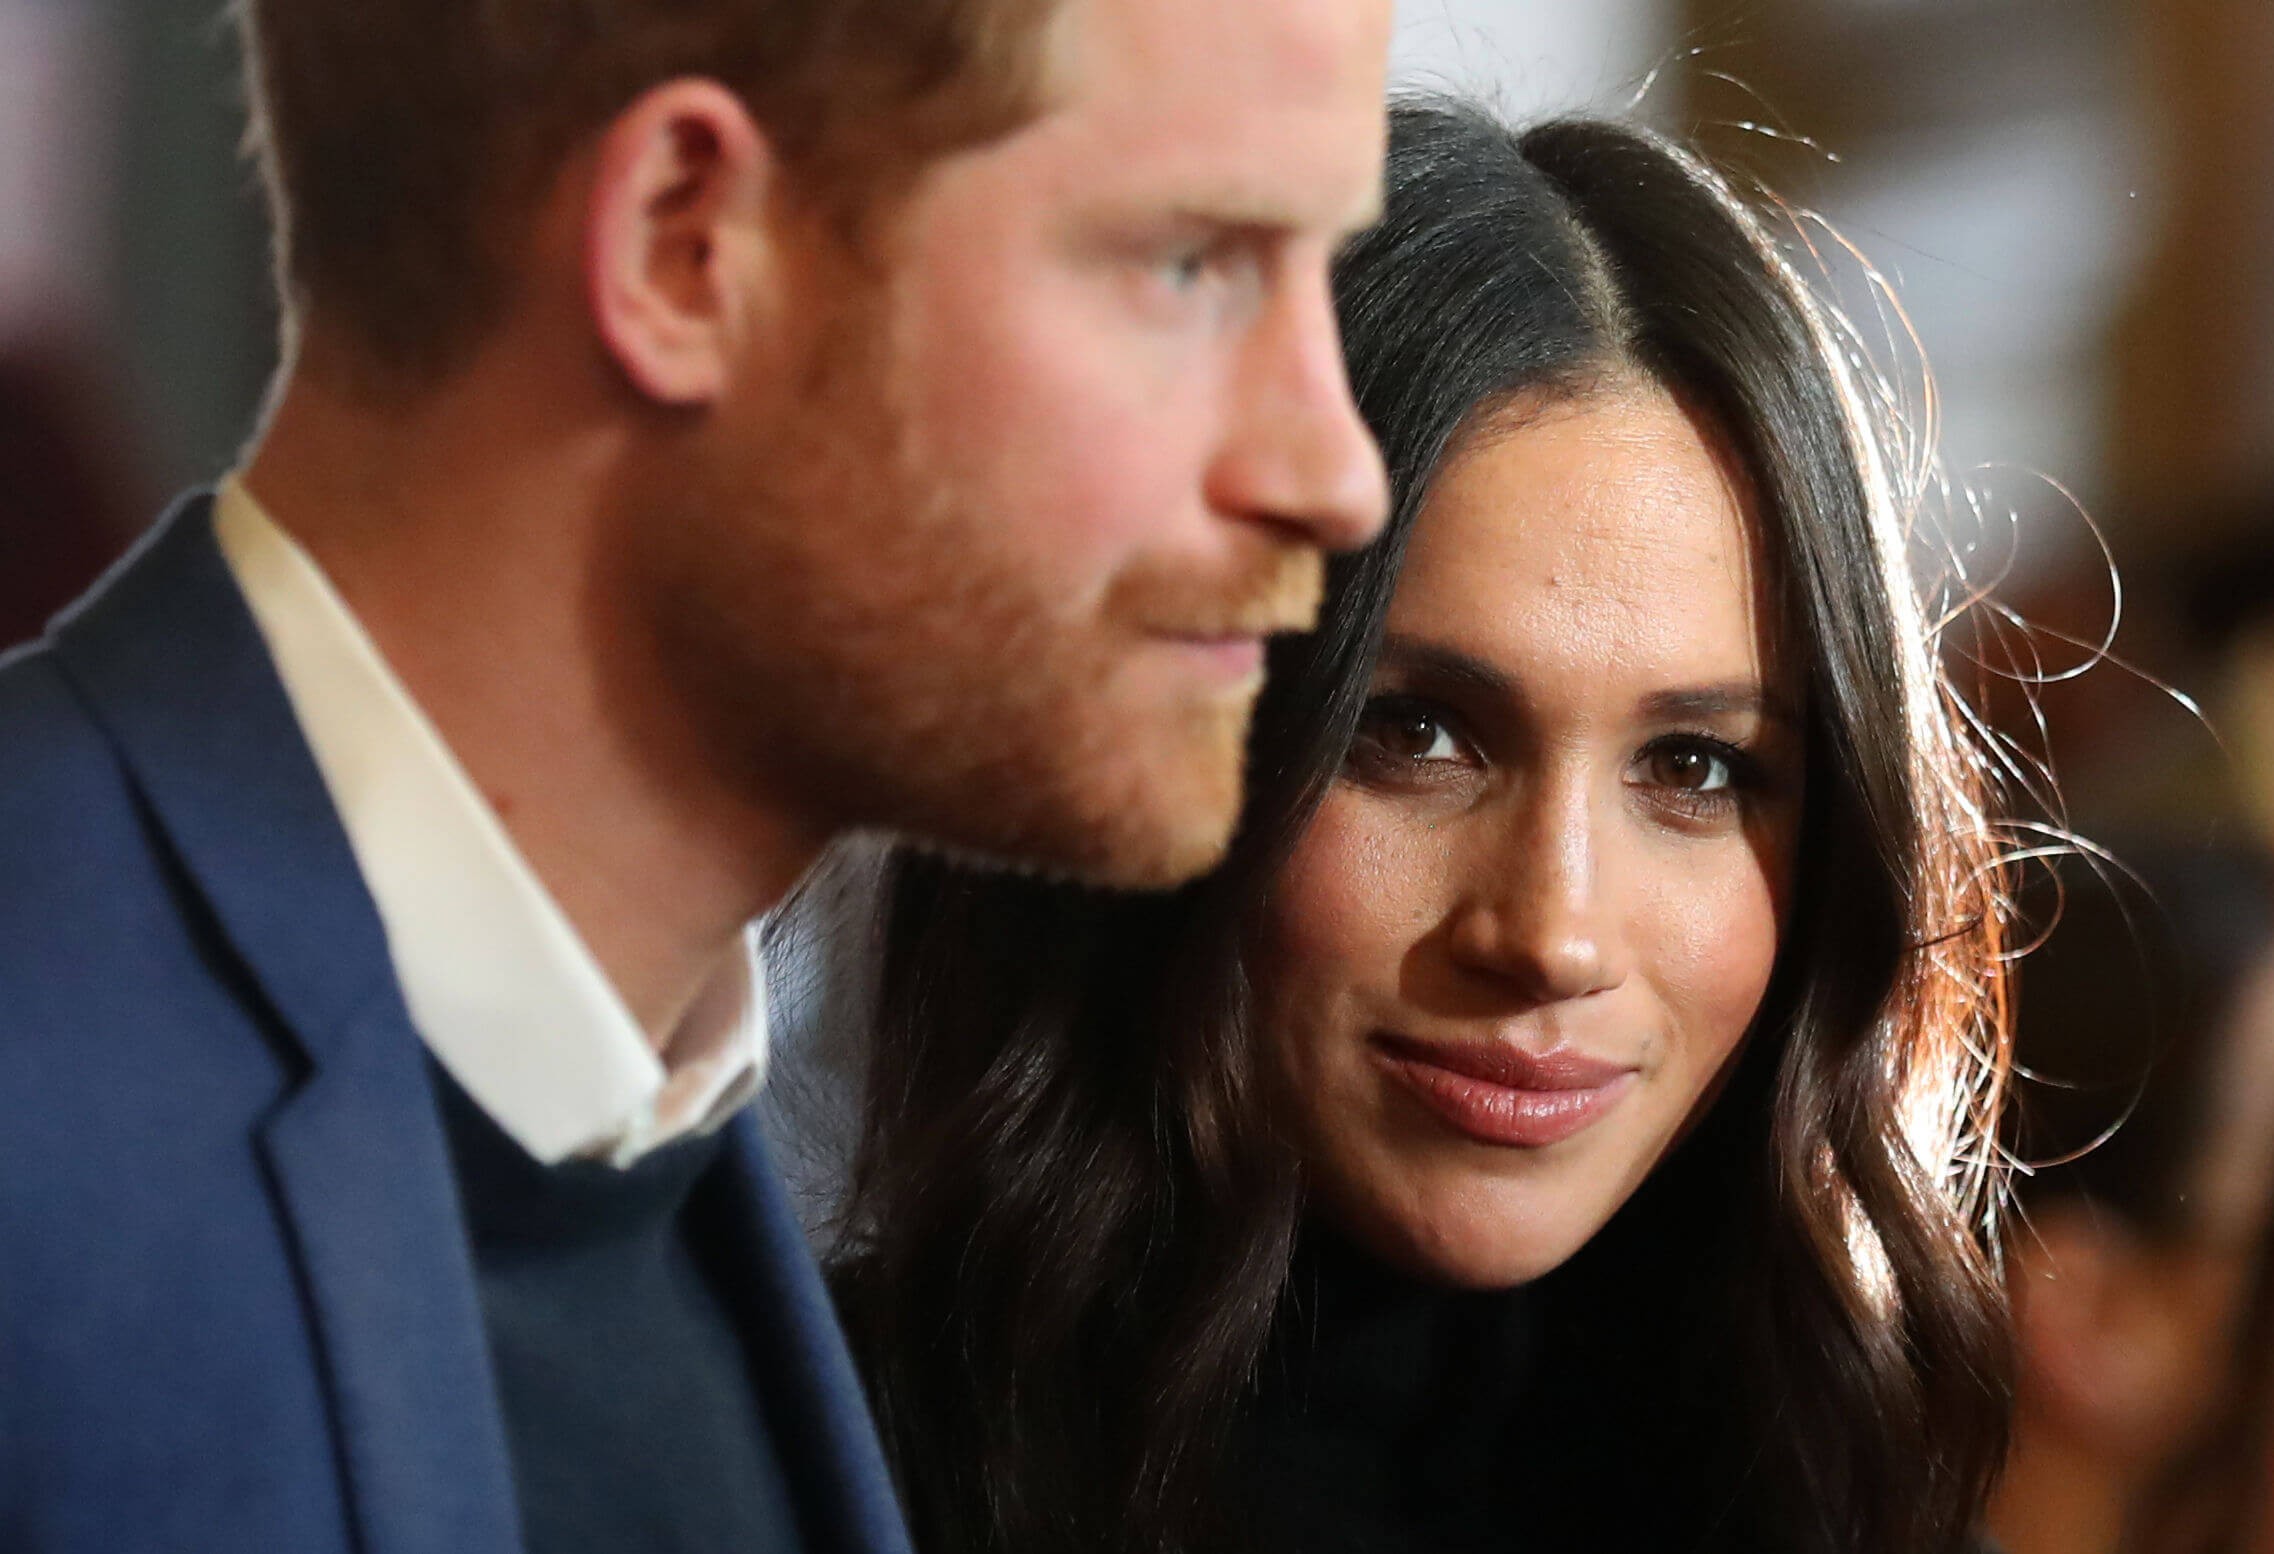 Prince Harry and Meghan Markle attend an event together.